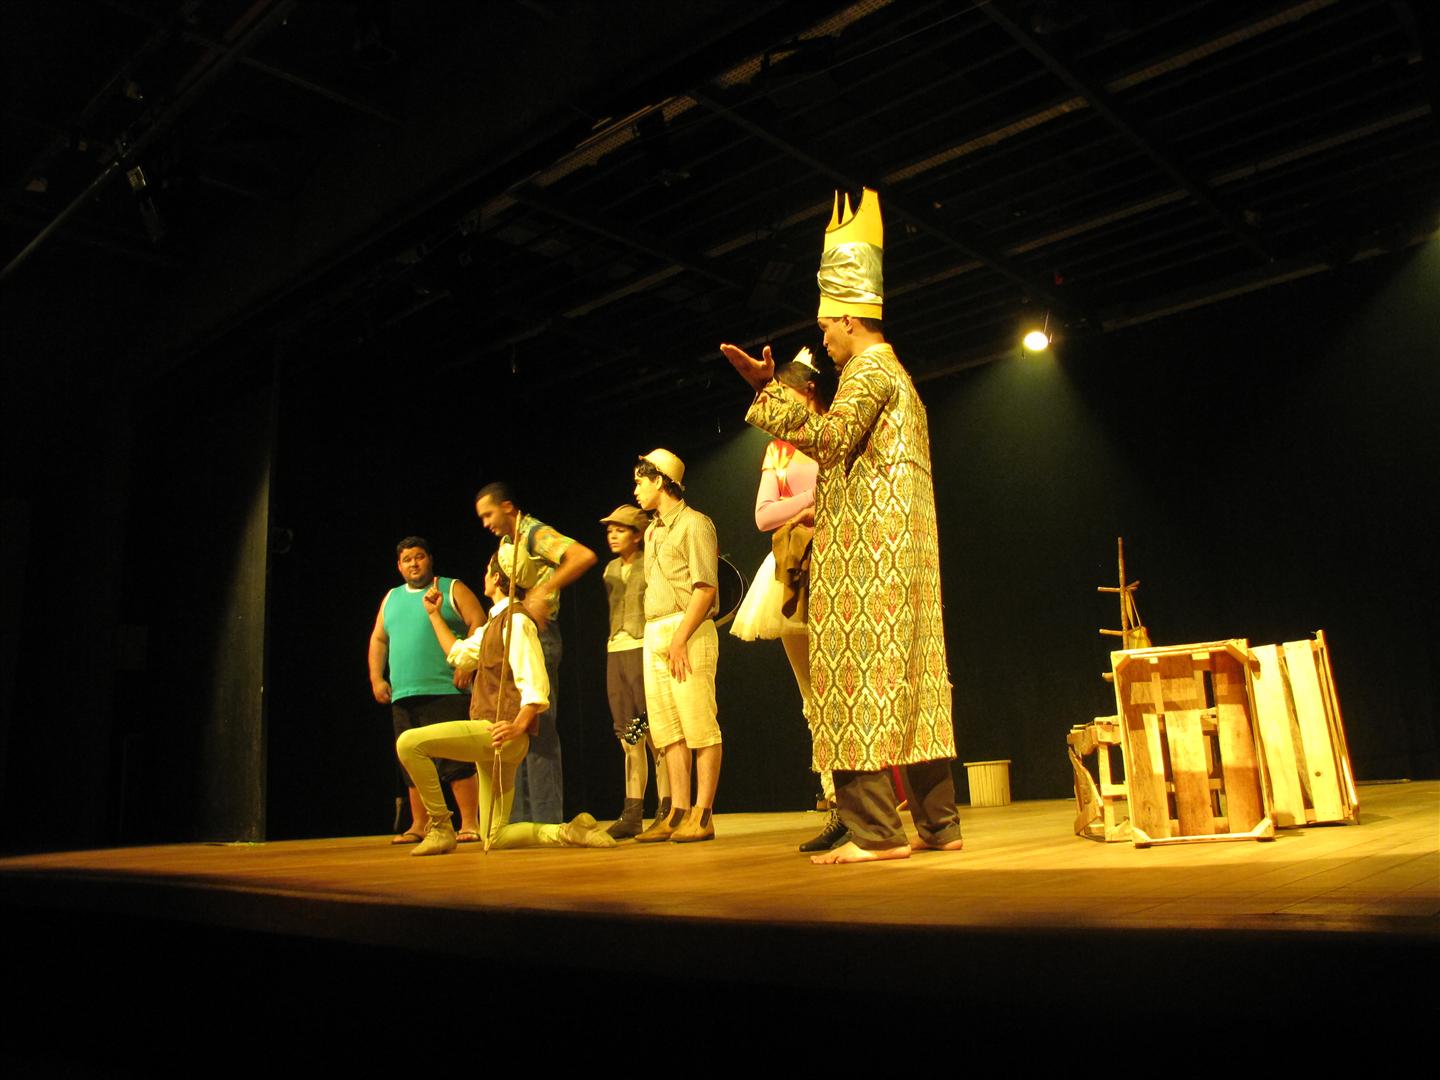 a group of people in costumes stand on stage